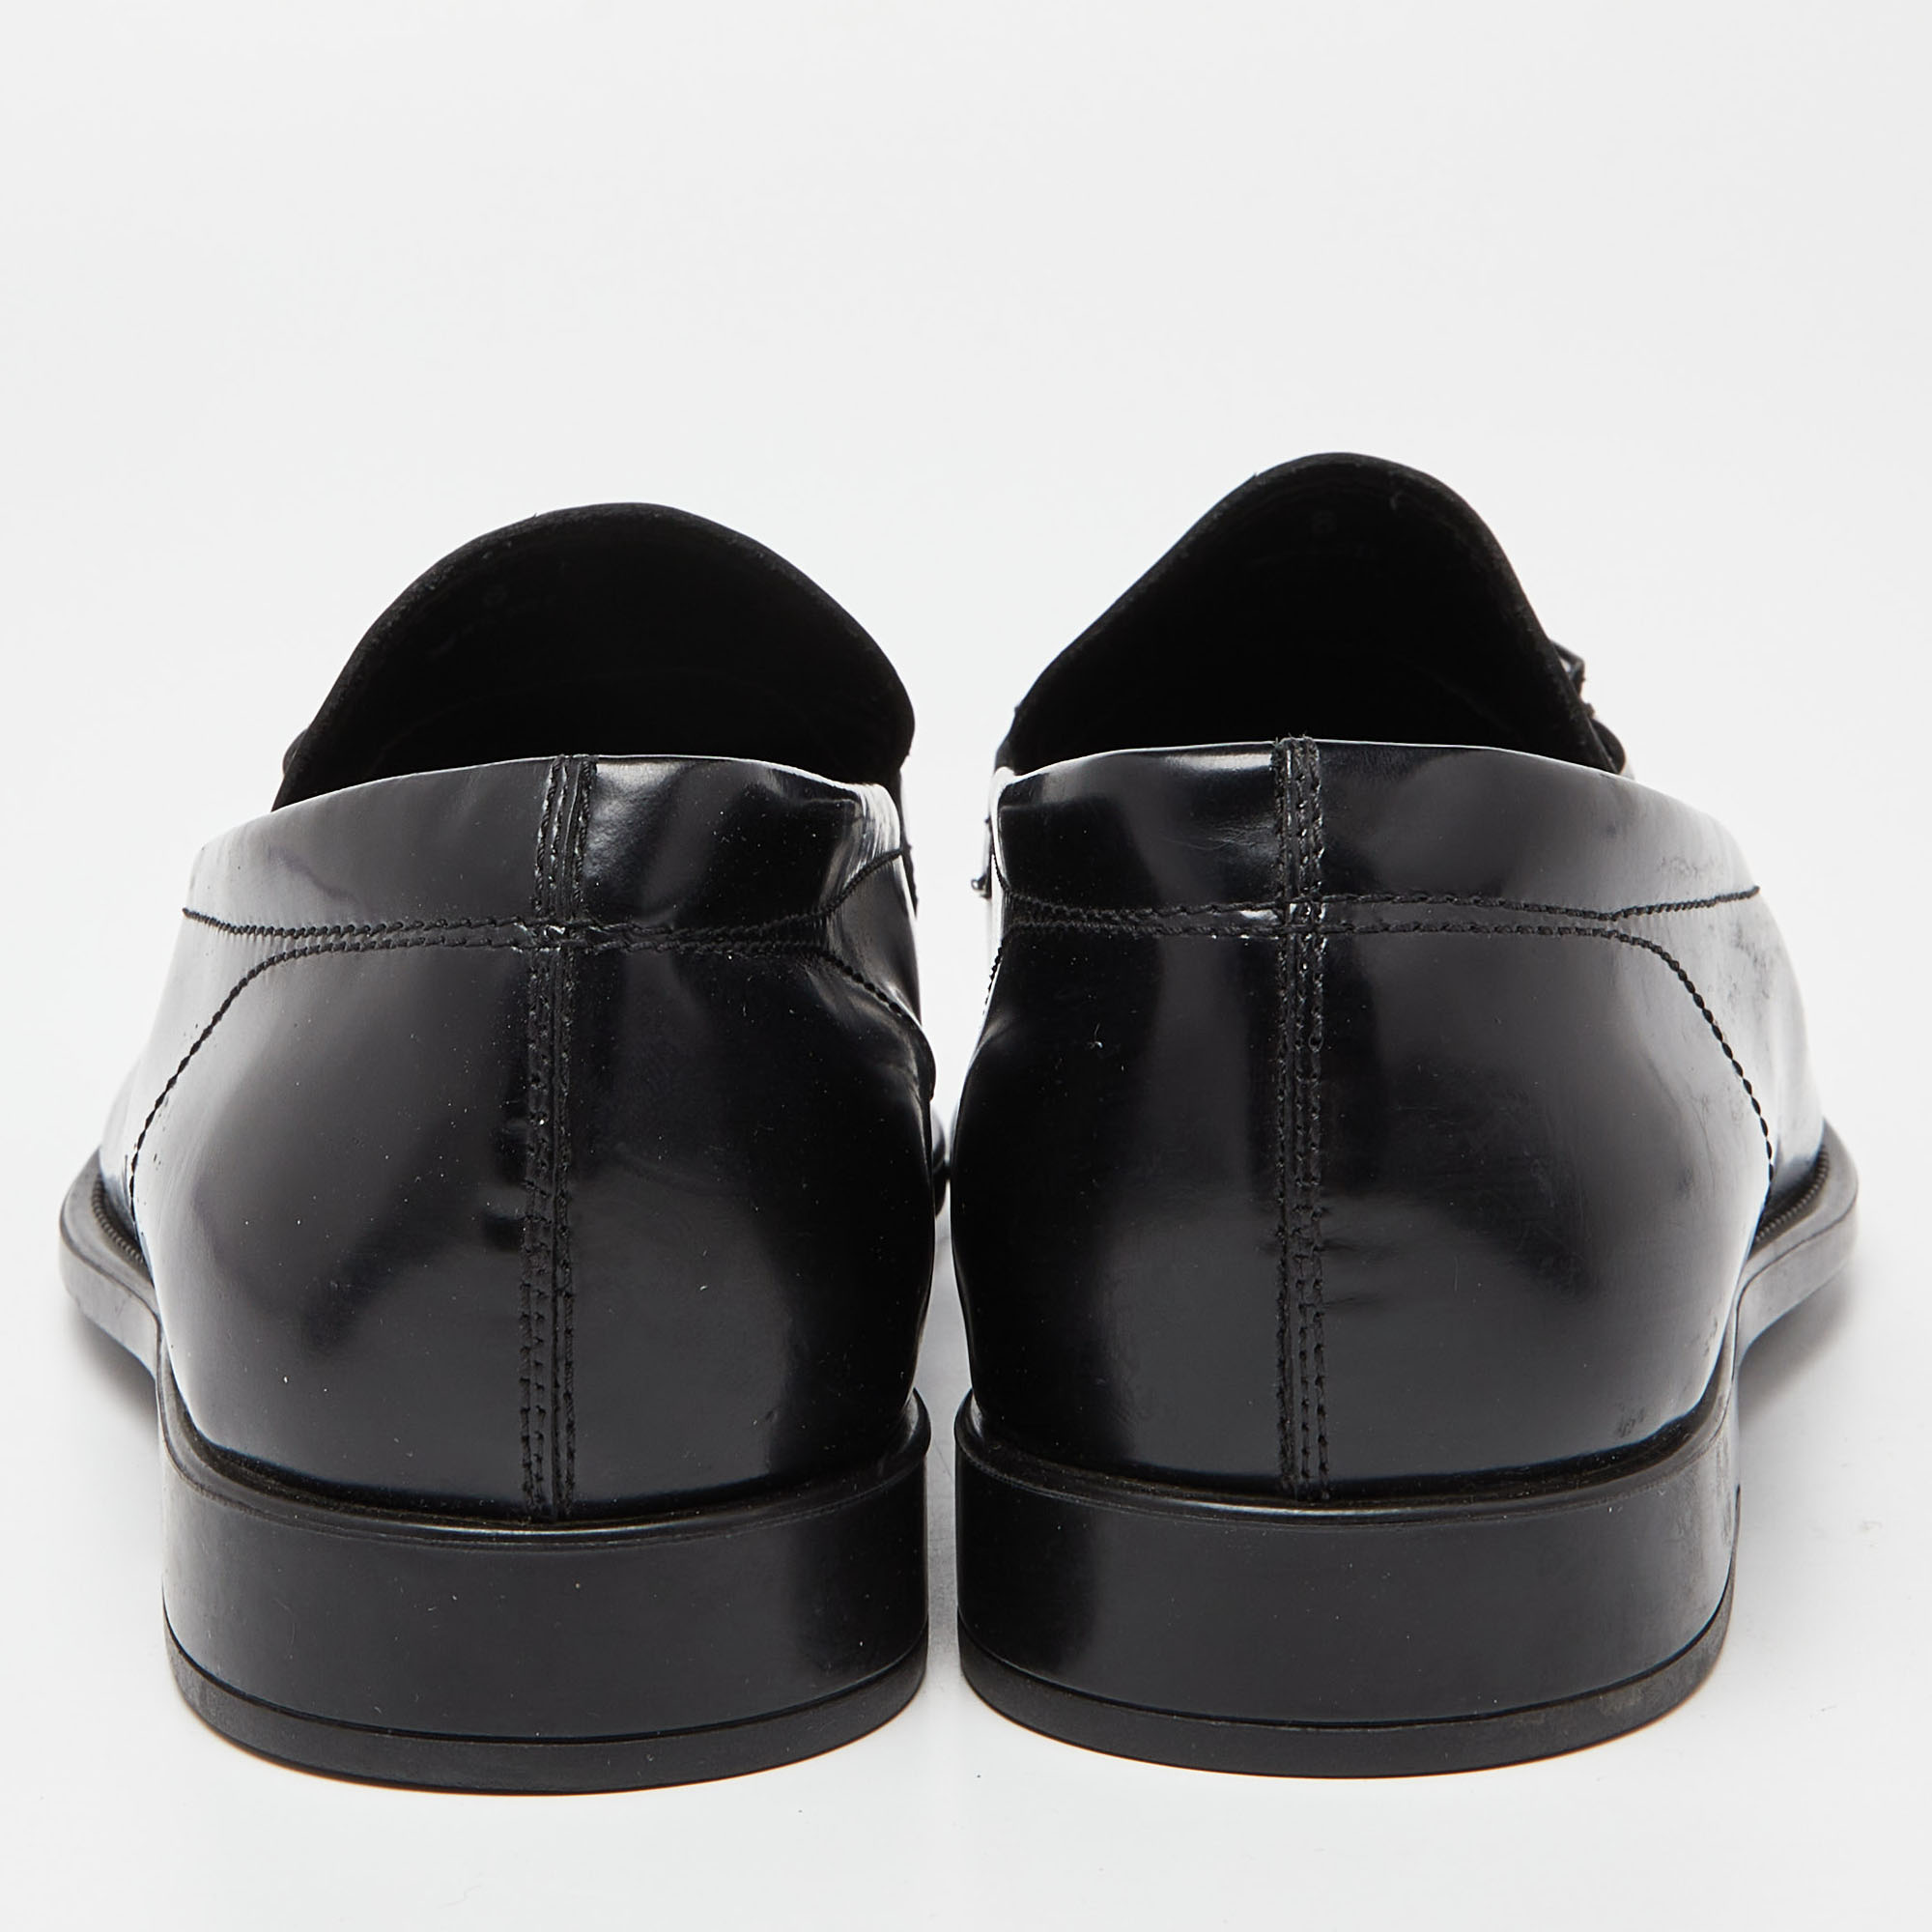 Tod's Black Patent Leather Slip On Loafers Size 39.5